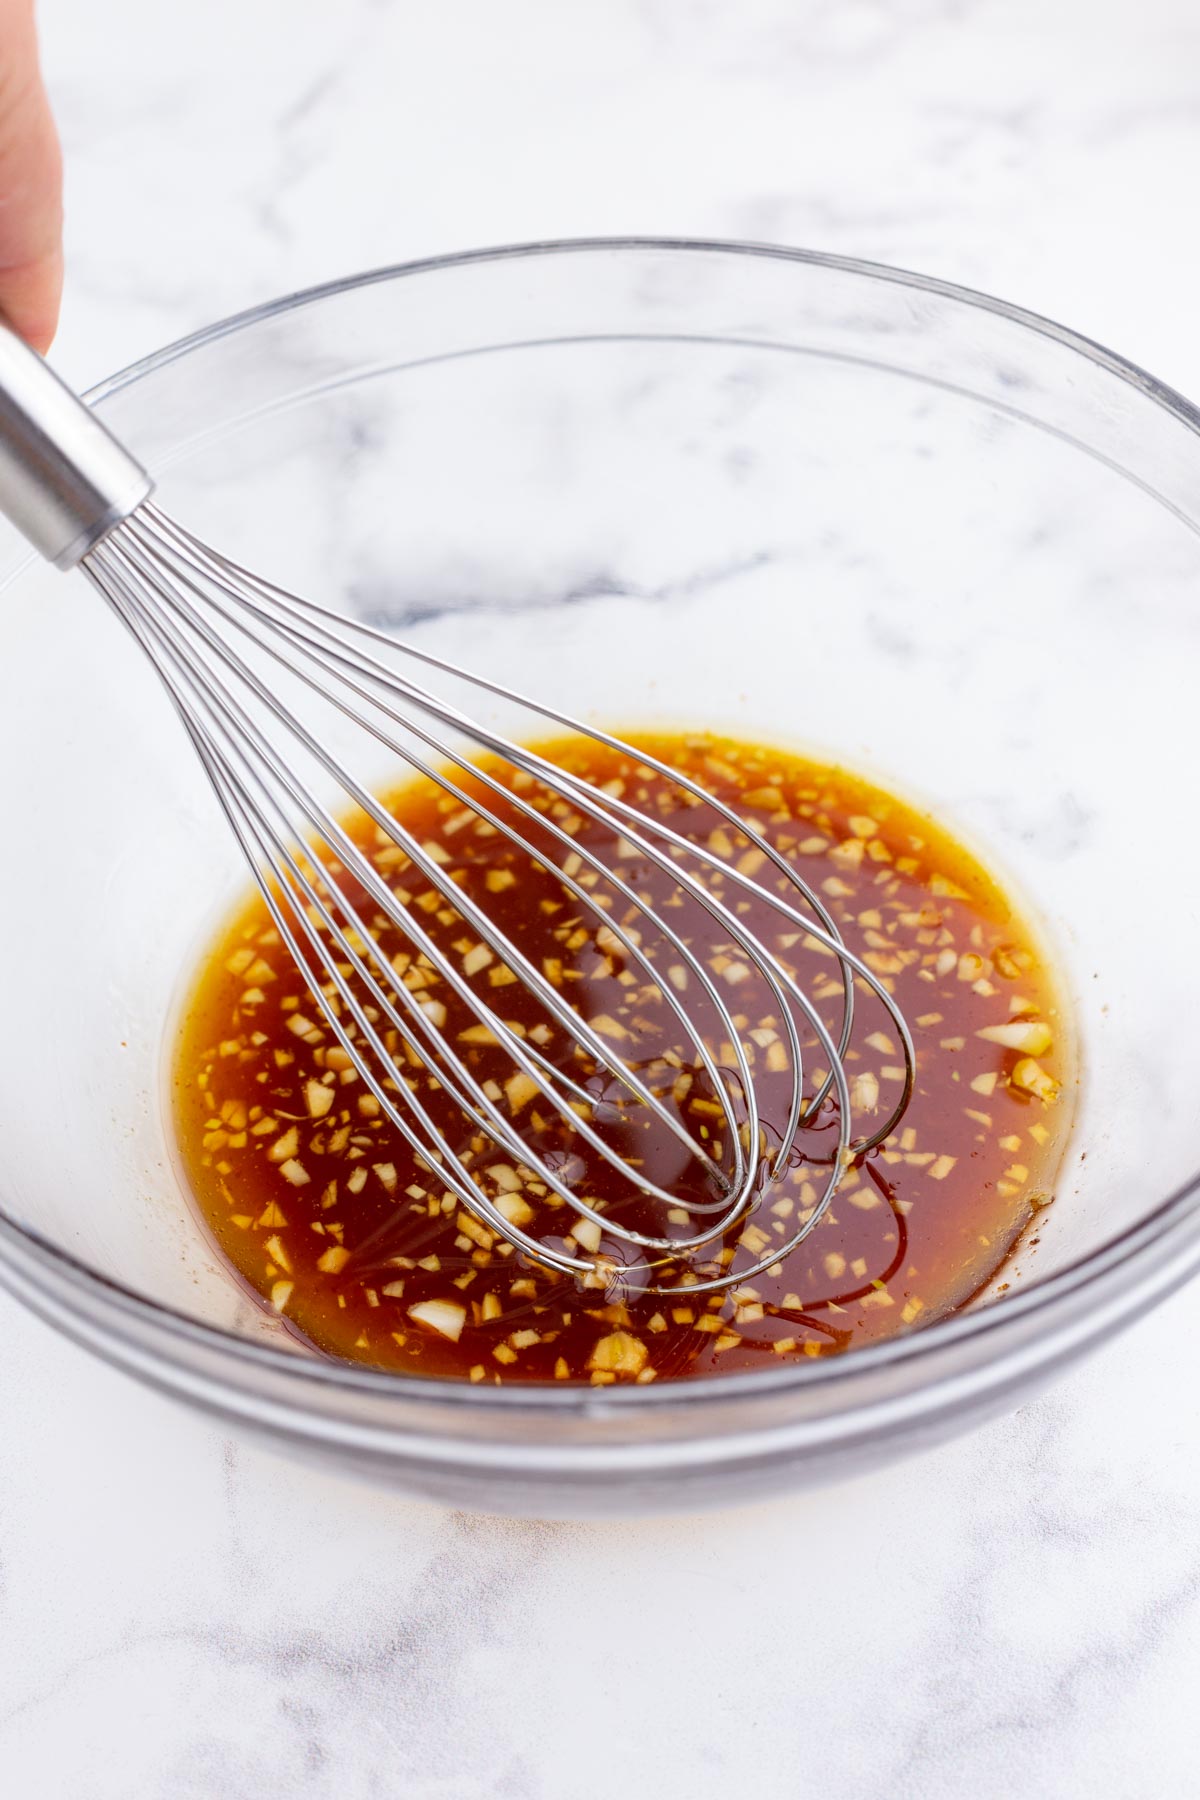 Marinade ingredients are whisked together,